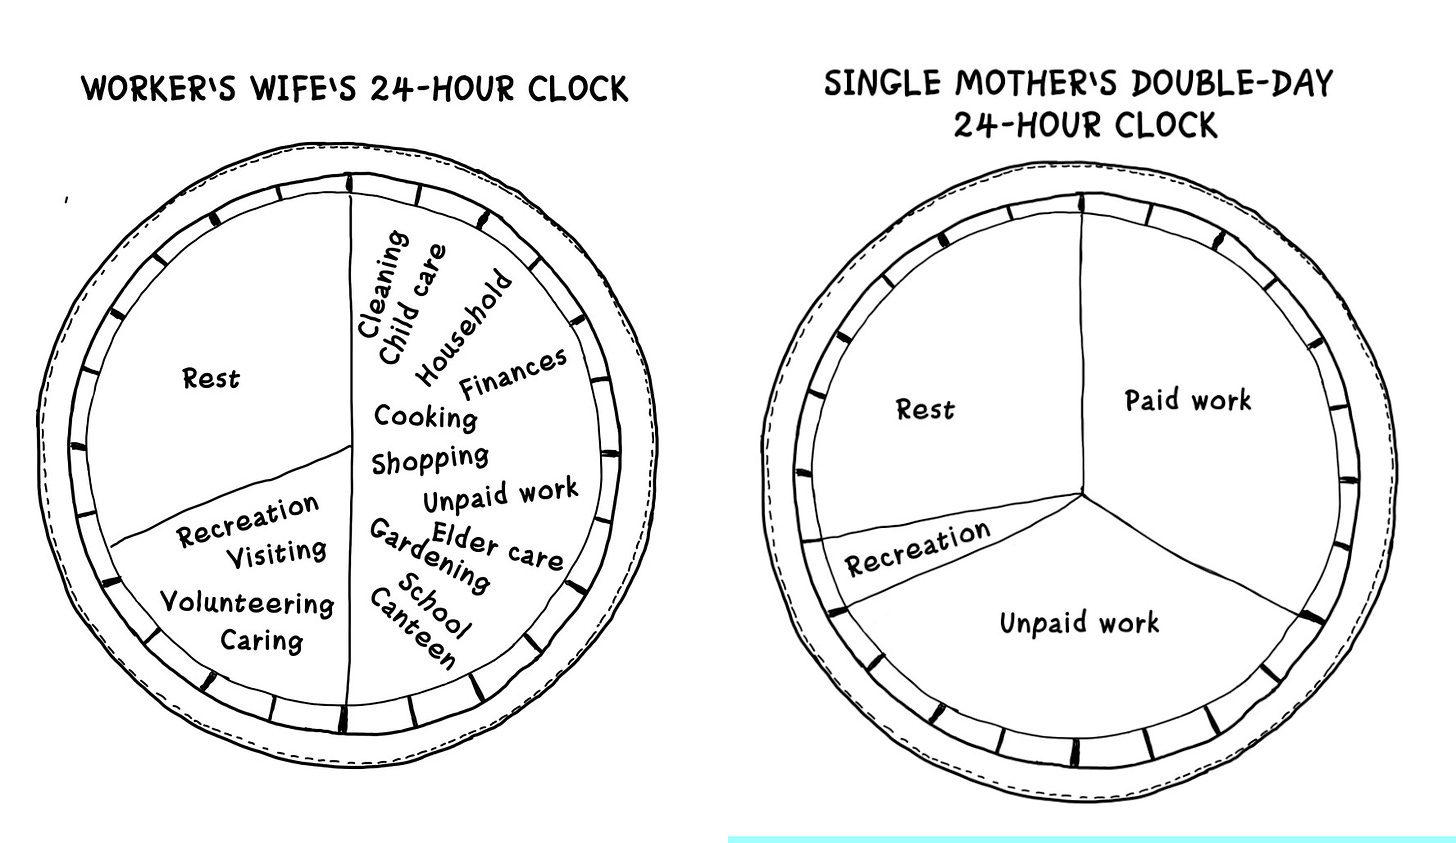 The 24-hour clock for the worker's wife and for a single mother.